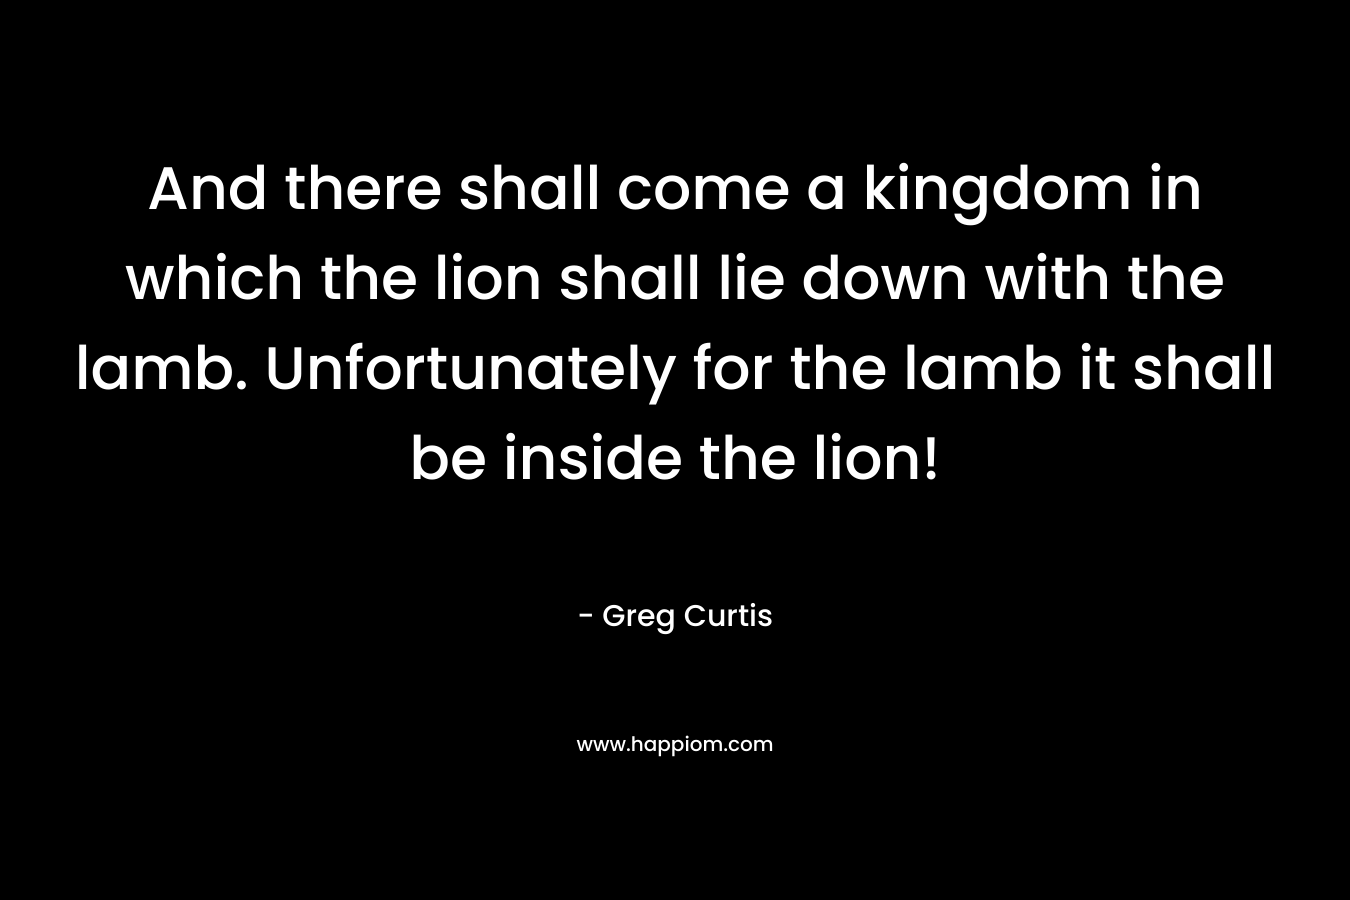 And there shall come a kingdom in which the lion shall lie down with the lamb. Unfortunately for the lamb it shall be inside the lion!